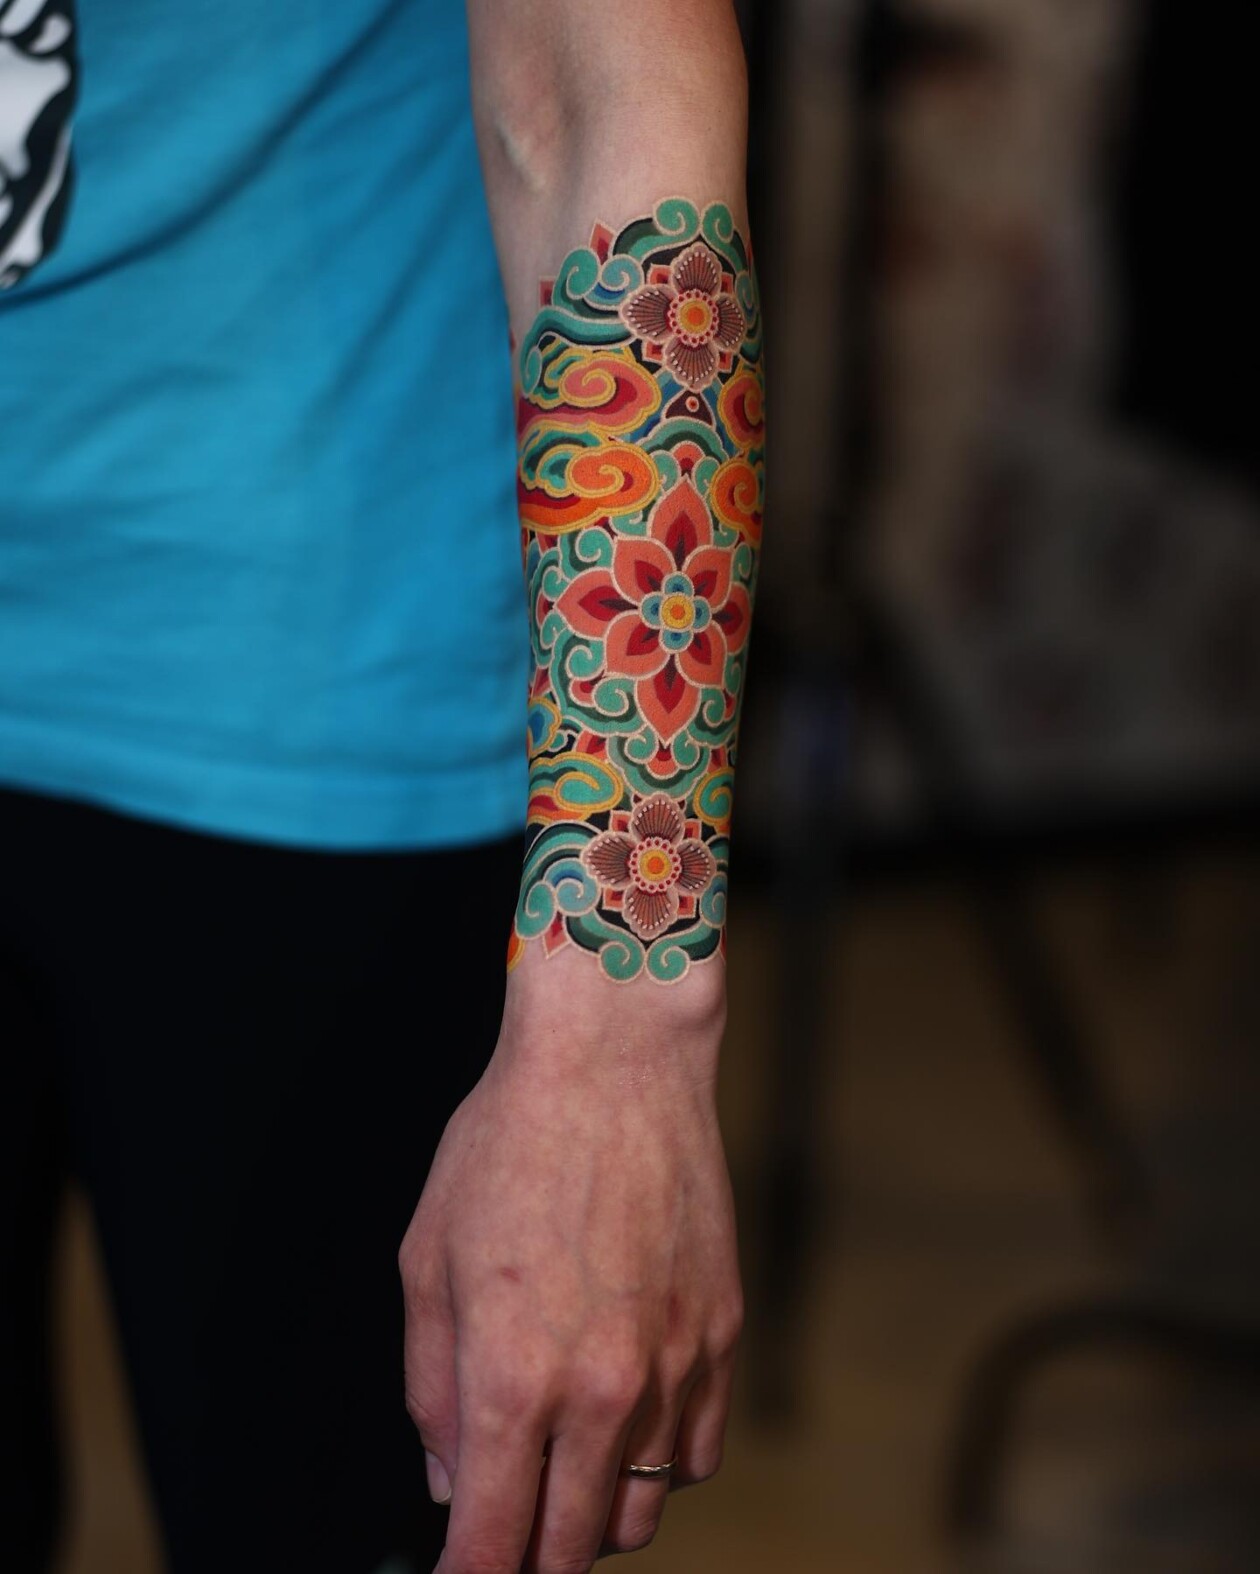 Vibrant Tattoos With Densely Layered Patterns By Korean Artist Pittakkm (10)